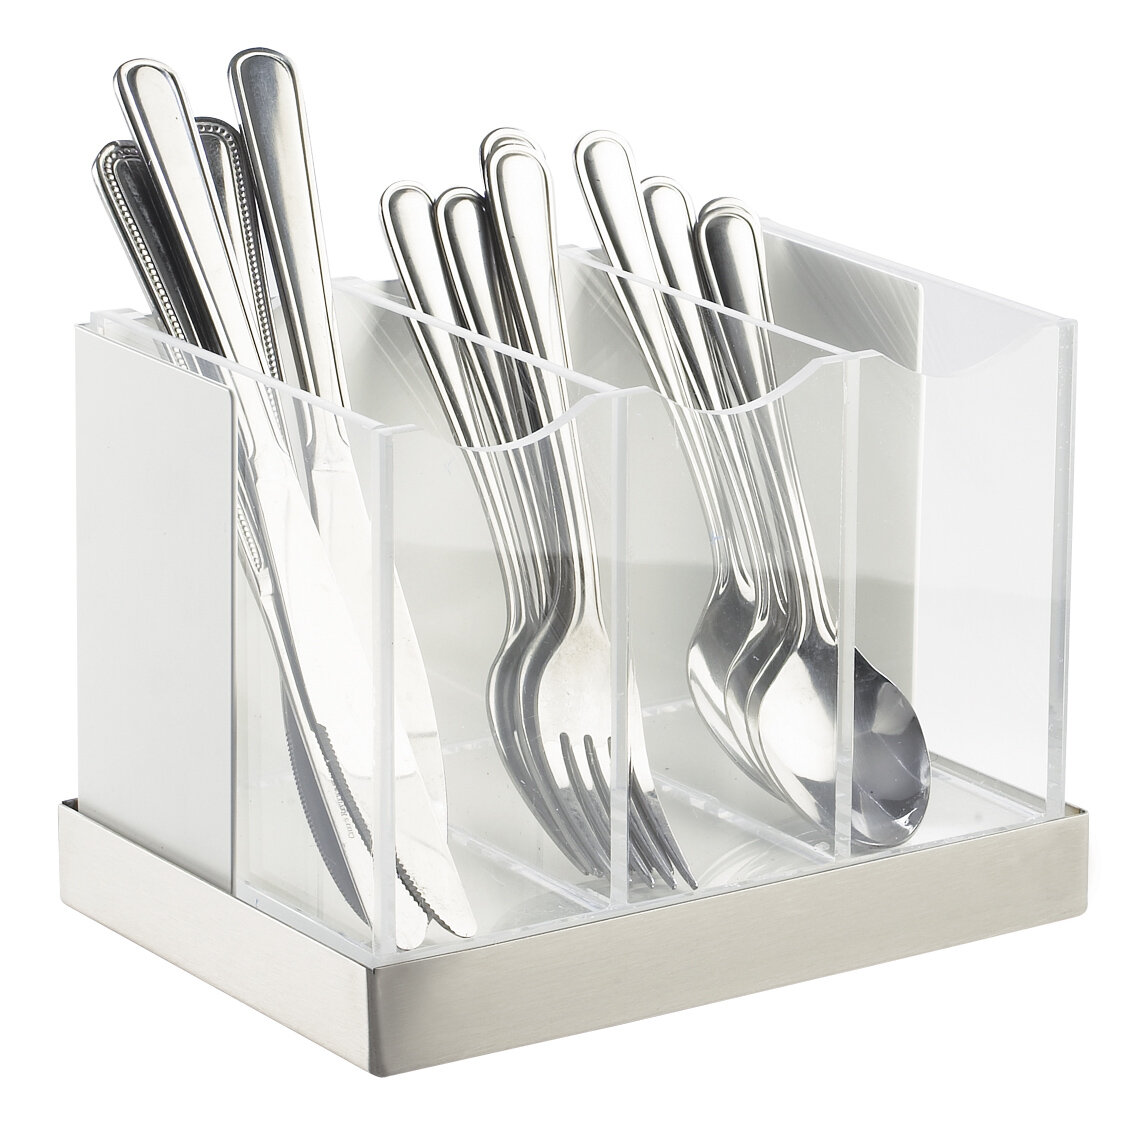 Bathroom Silverware Spatula GoCraft Utensil/Cutlery Caddy/Storage Organizer Spoons Health and Beauty products 4 Compartment Galvanised Iron Utensil Holders/Organizers for your Utensils 